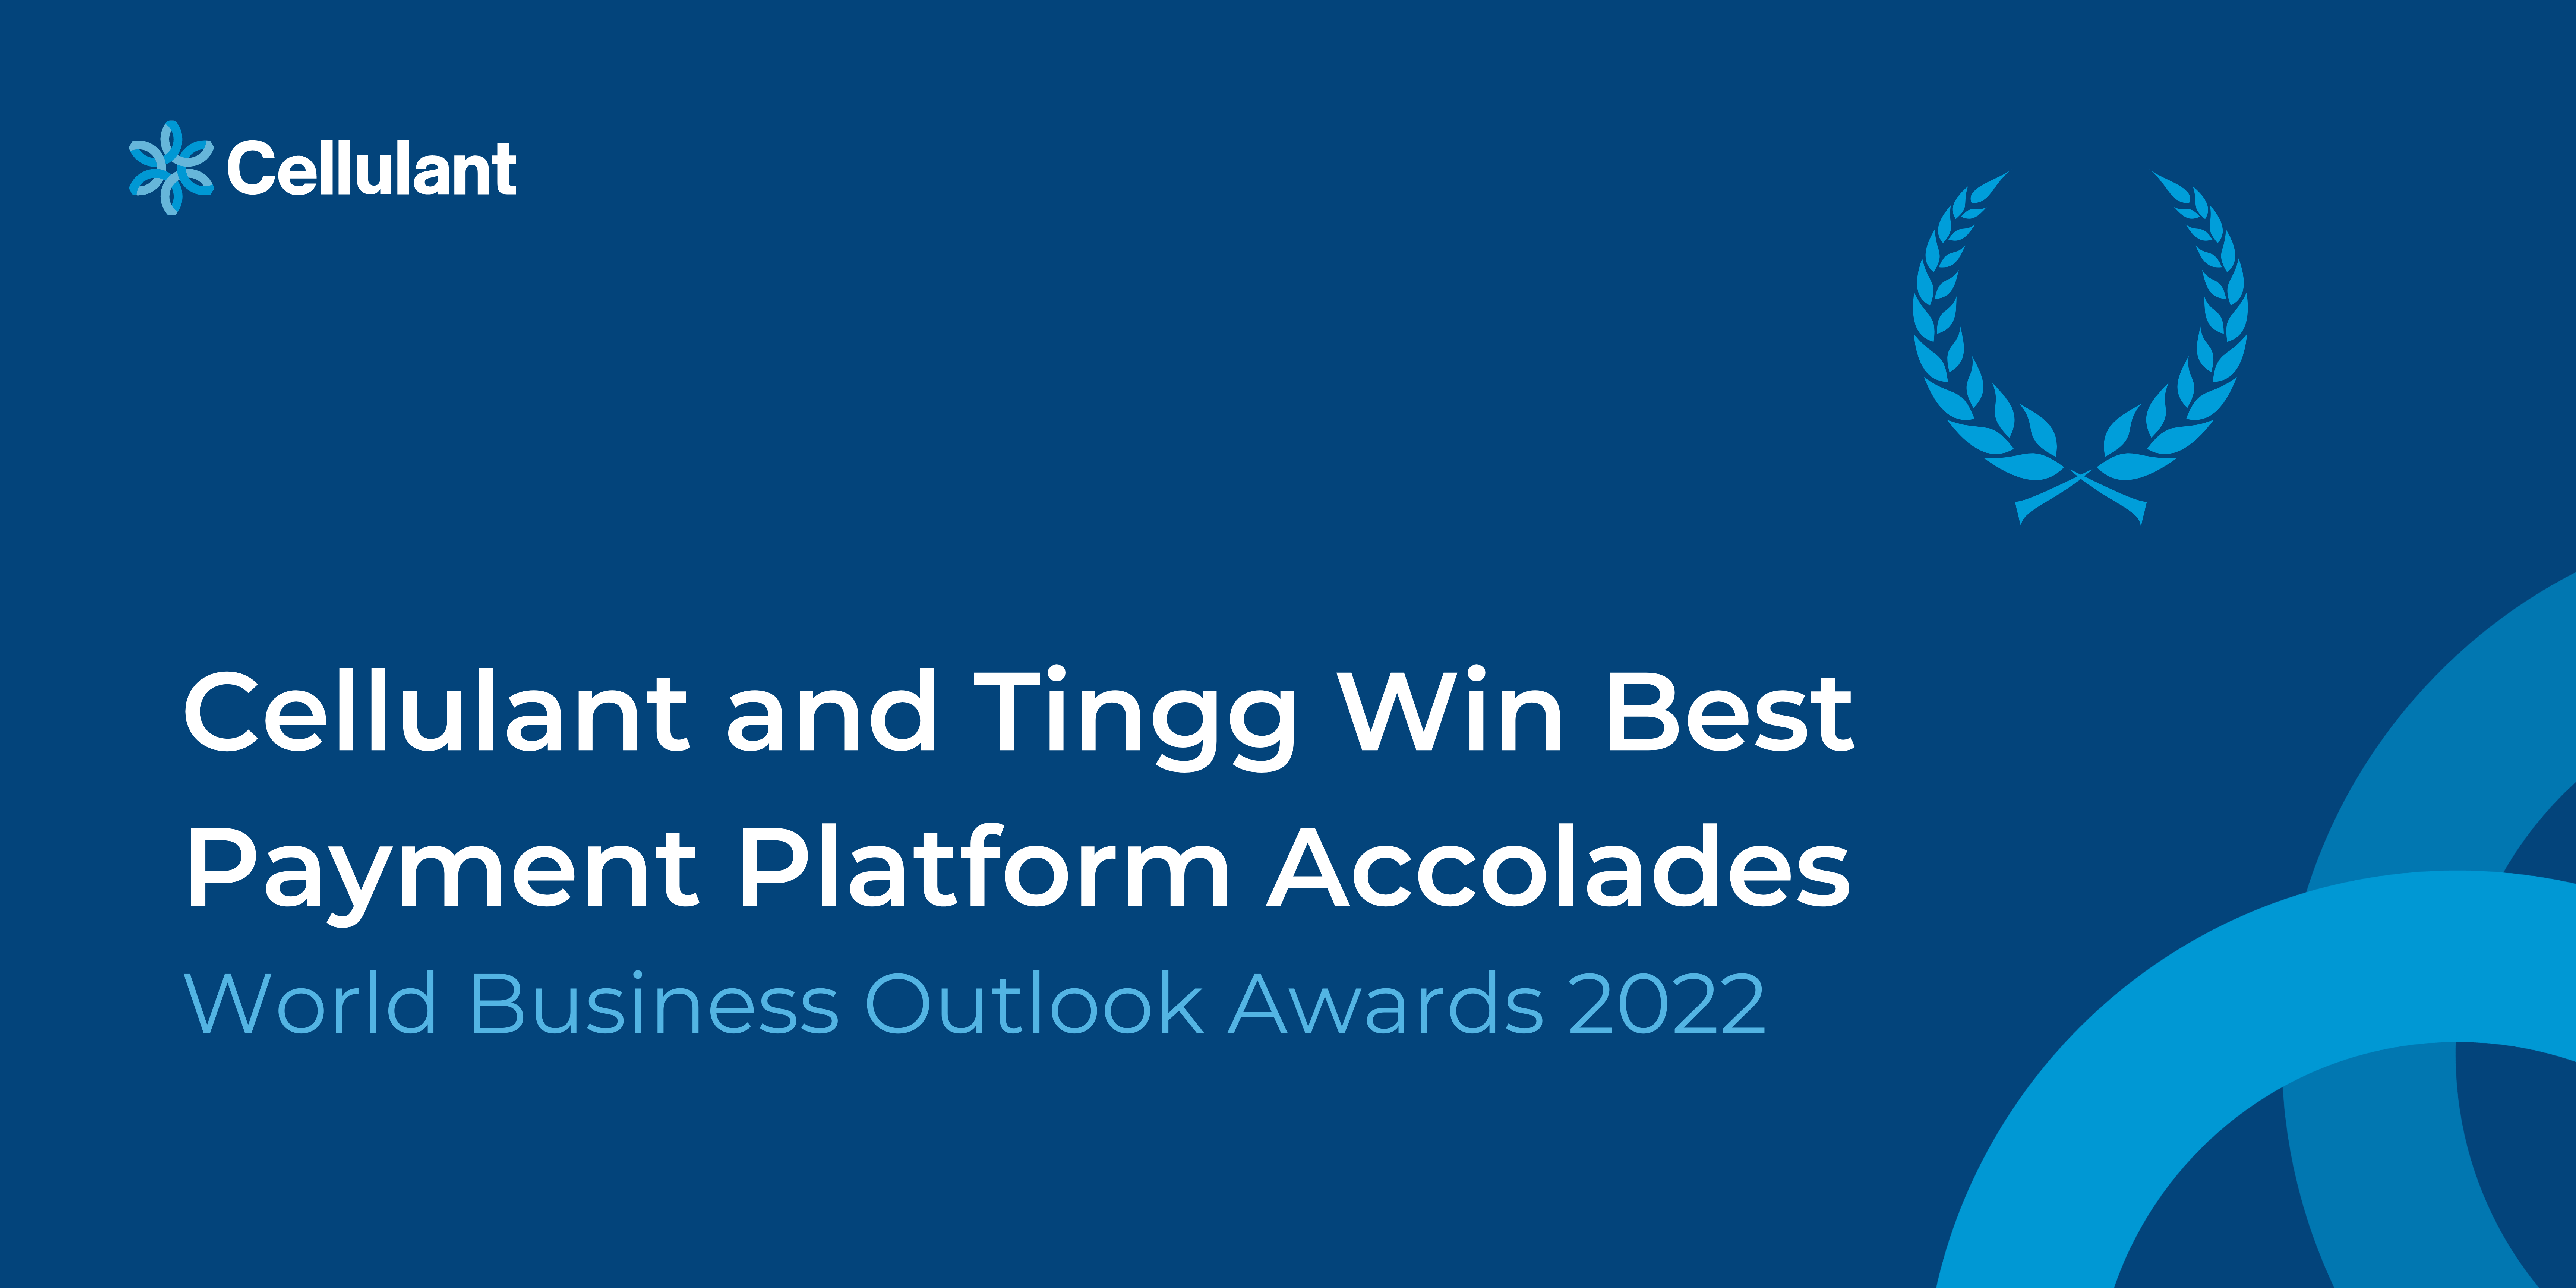 Cellulant and Tingg Win Best Payment Platform Awards